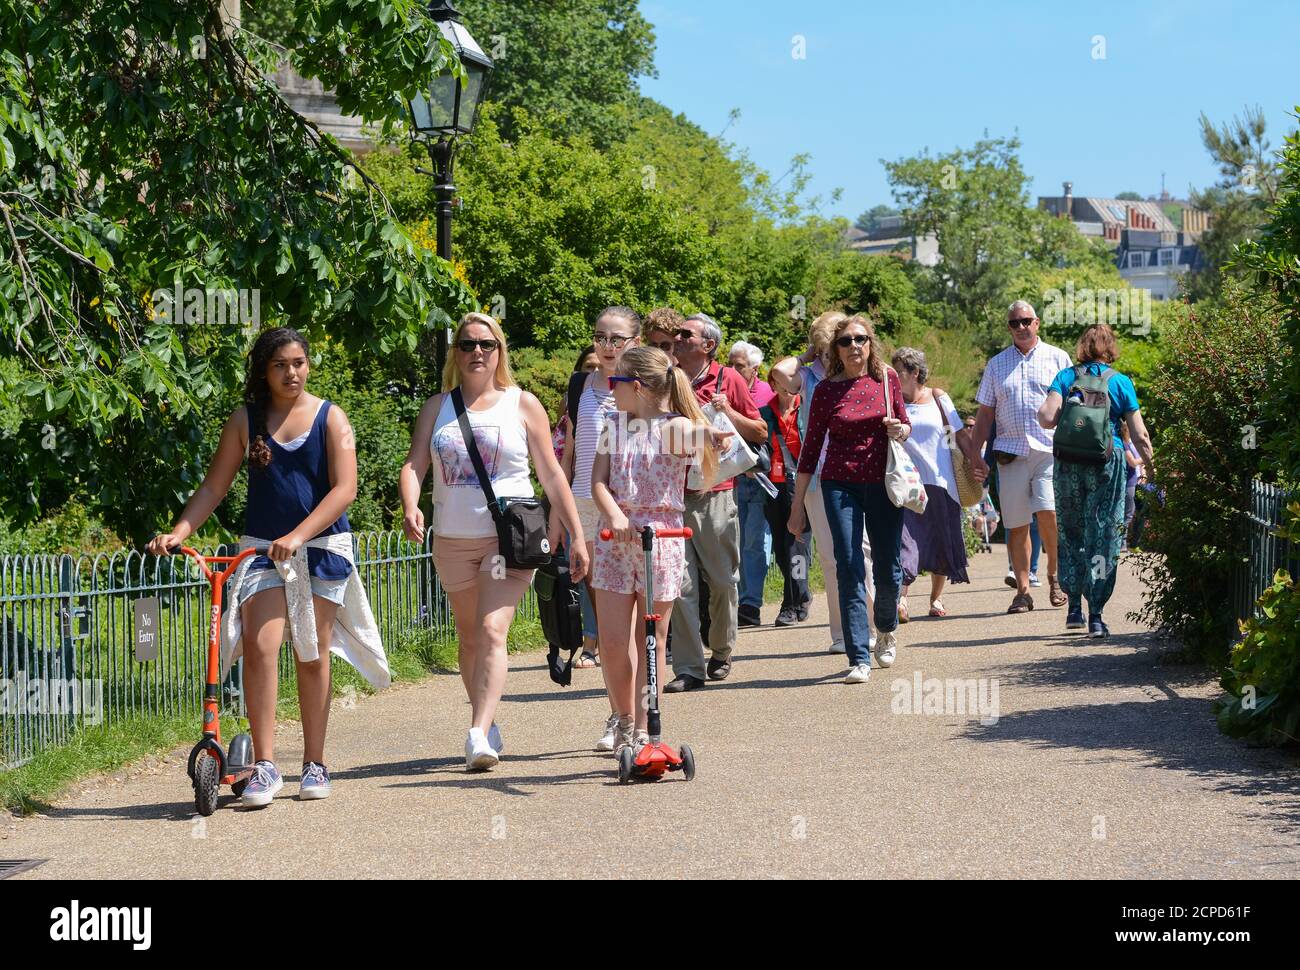 Crowds of people walking through the park at The Royal Pavilion Gardens on a hot day in Summer in Brighton, East Sussex, England, UK. Stock Photo